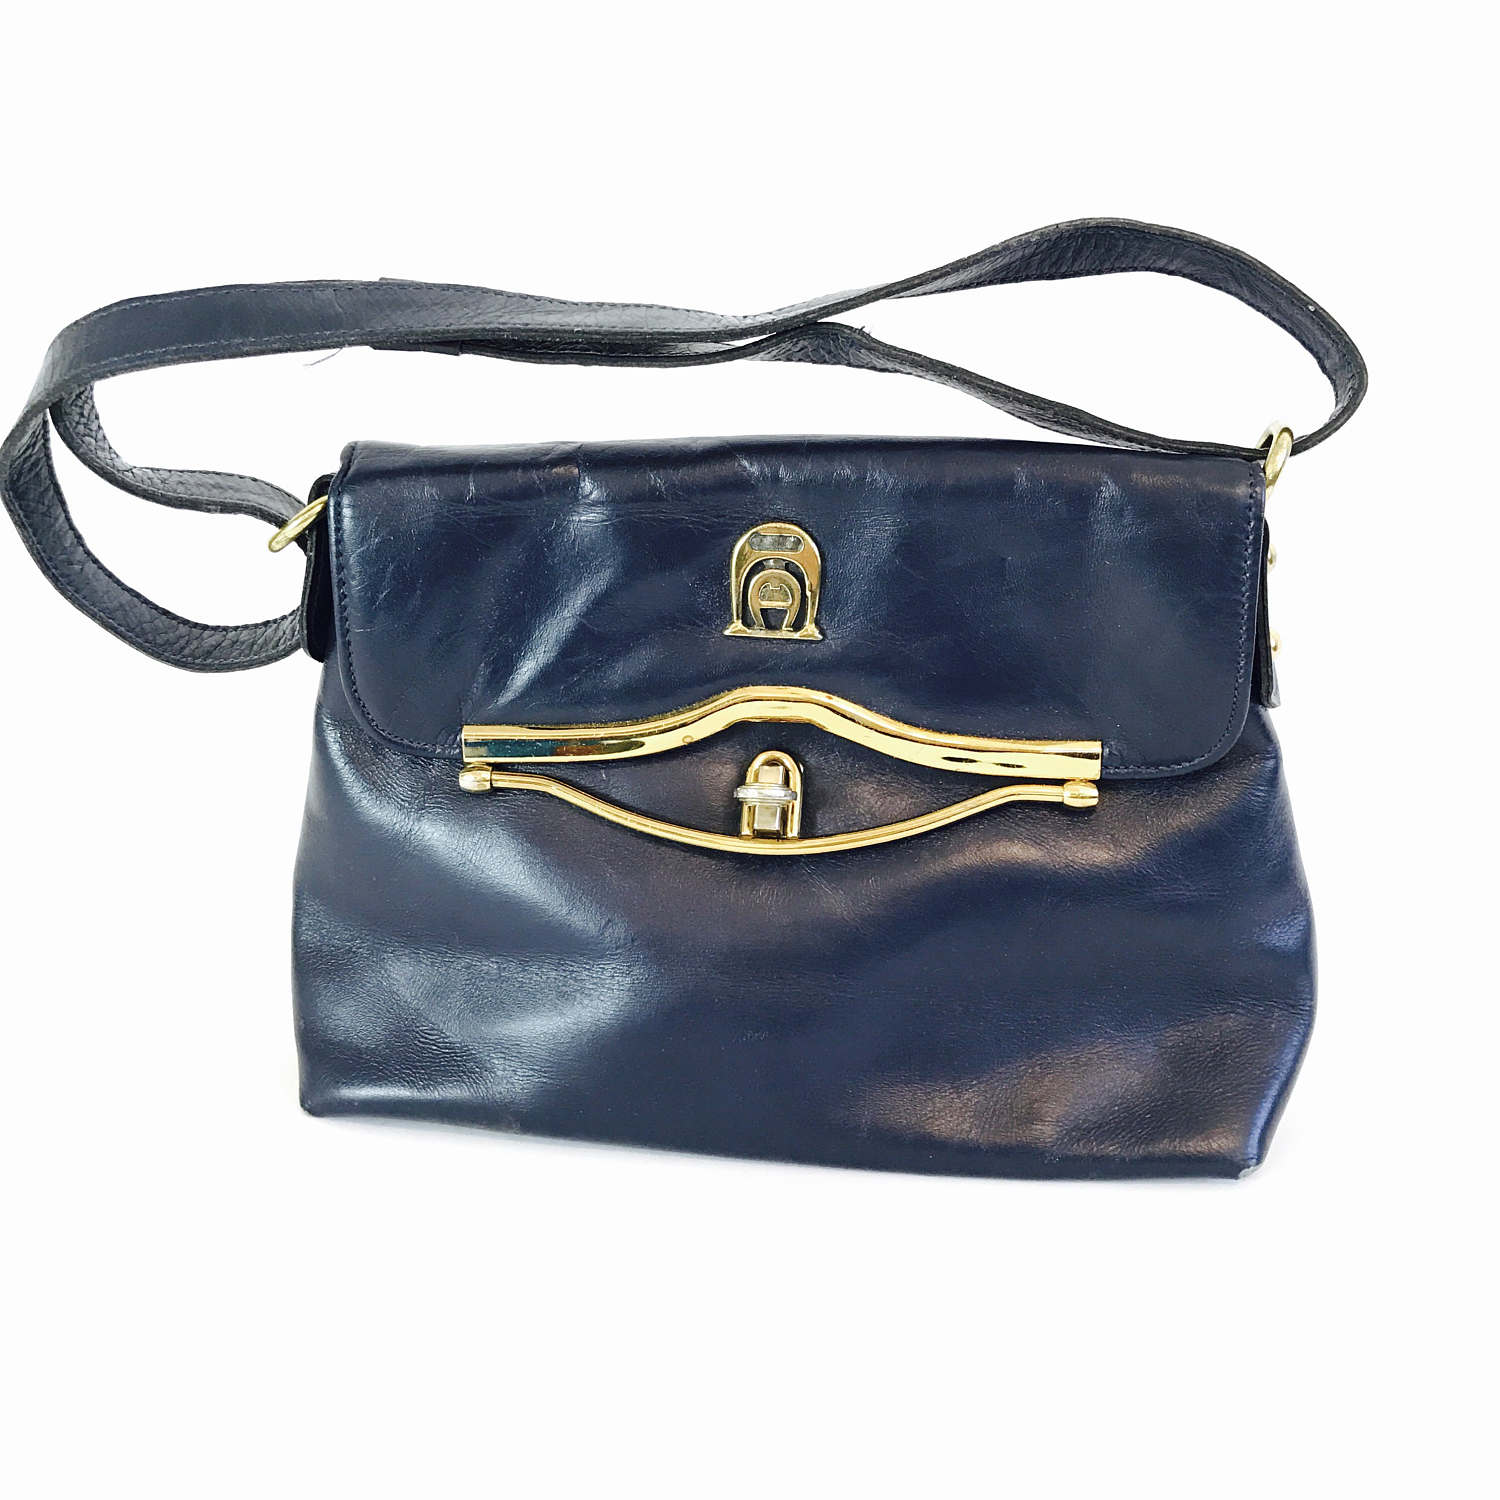 Navy/Khaki Reversible 3 in 1 Purse - Lizzy's Pink Boutique